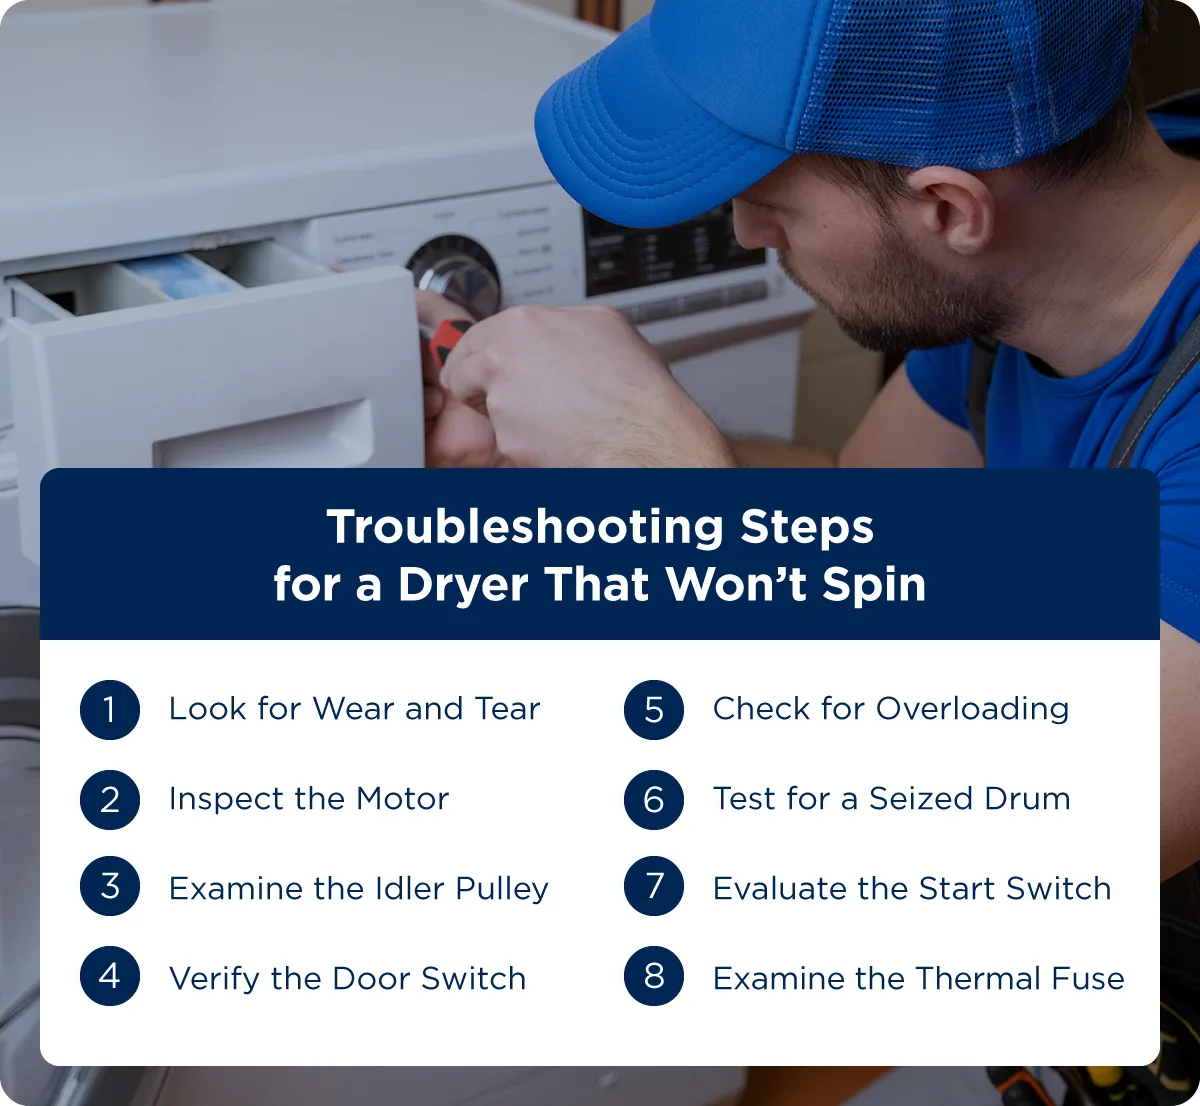 Troubleshooting steps to fix a dryer that won’t spin.